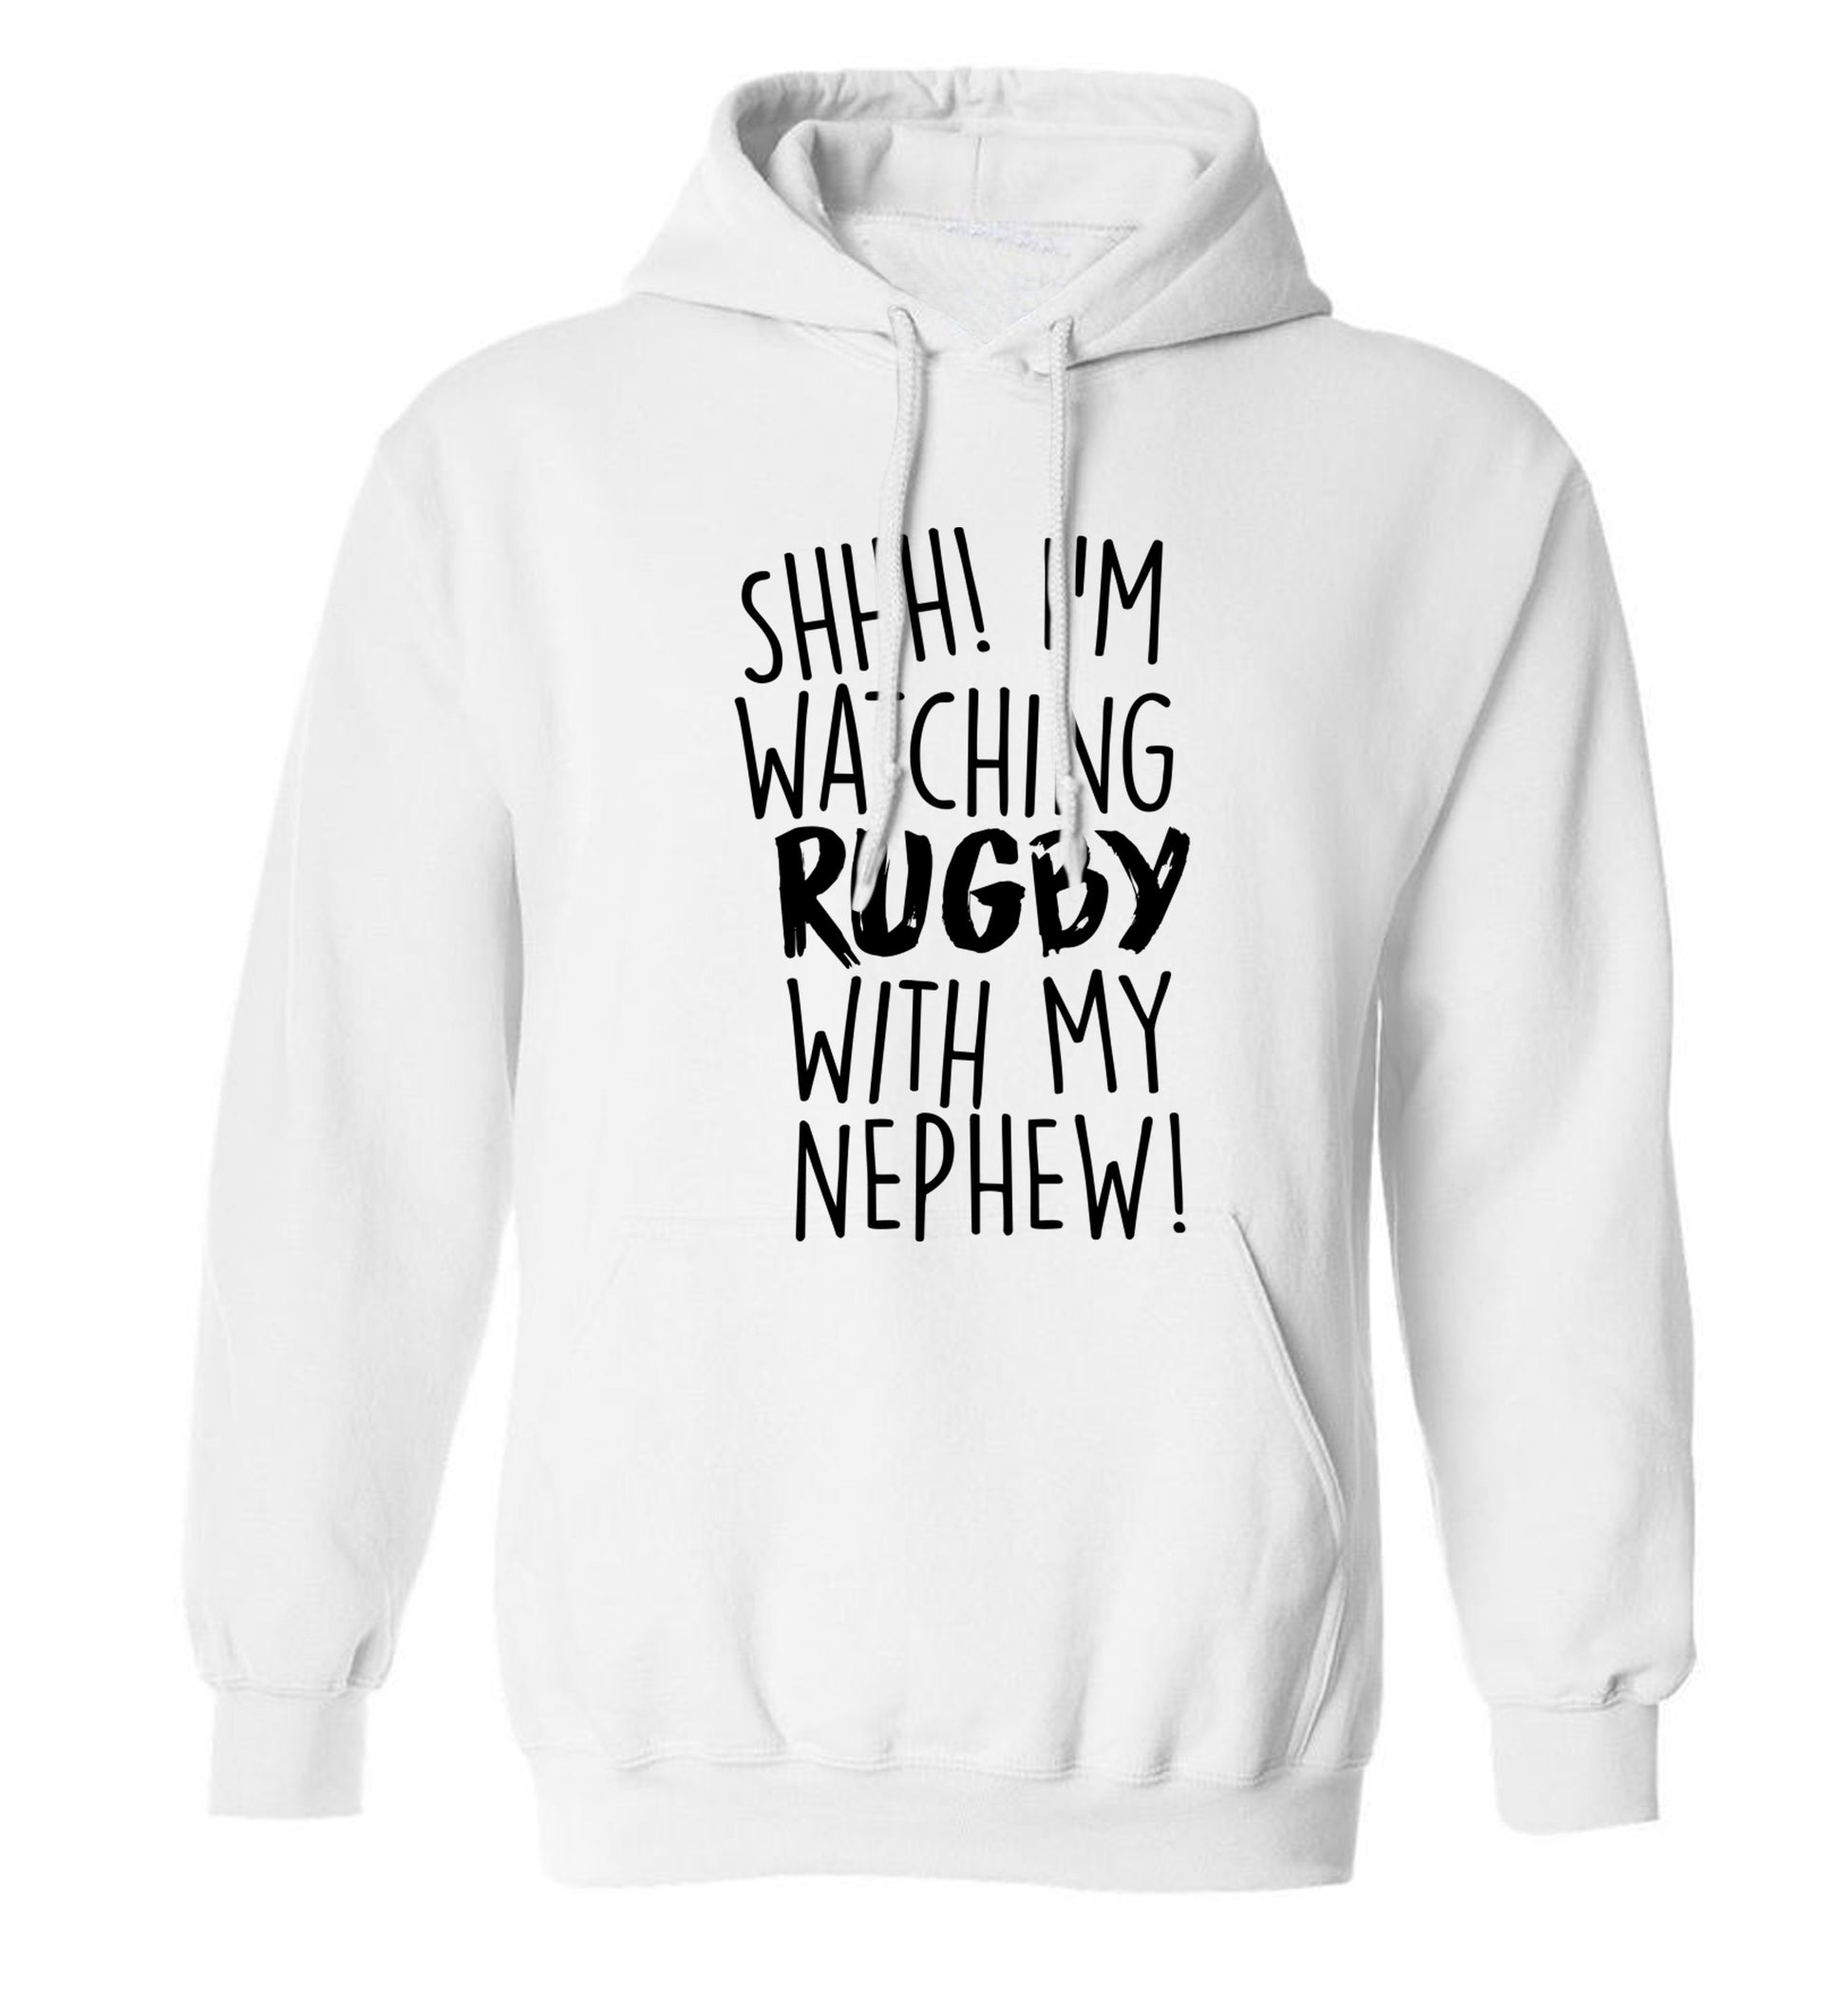 Shh.. I'm watching rugby with my nephew adults unisex white hoodie 2XL